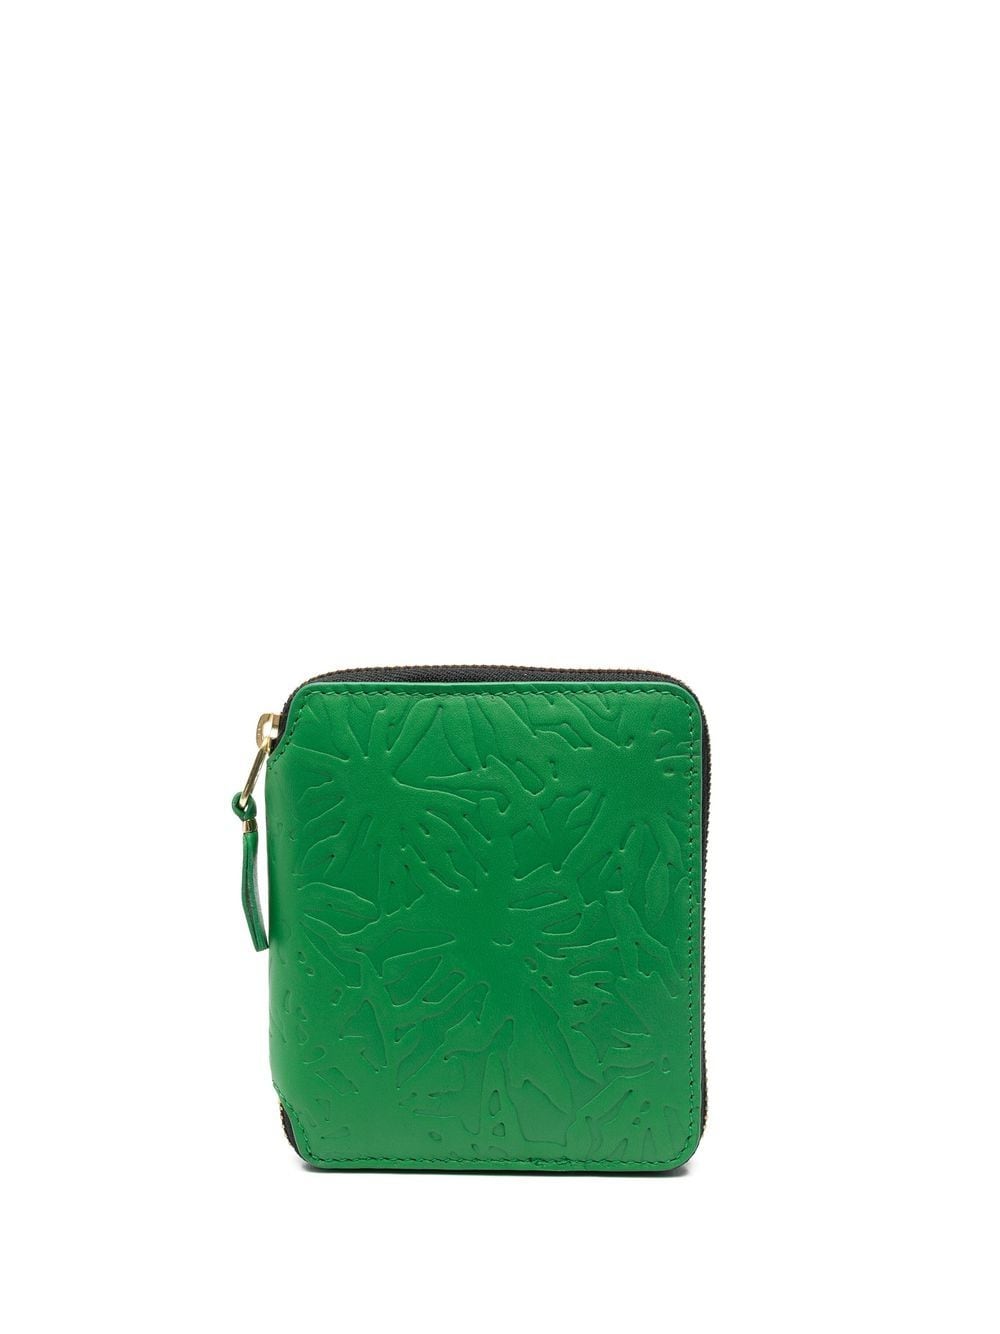 Valentino Rockstud Leather Zip Coin Purse/Card Holder Forest Green